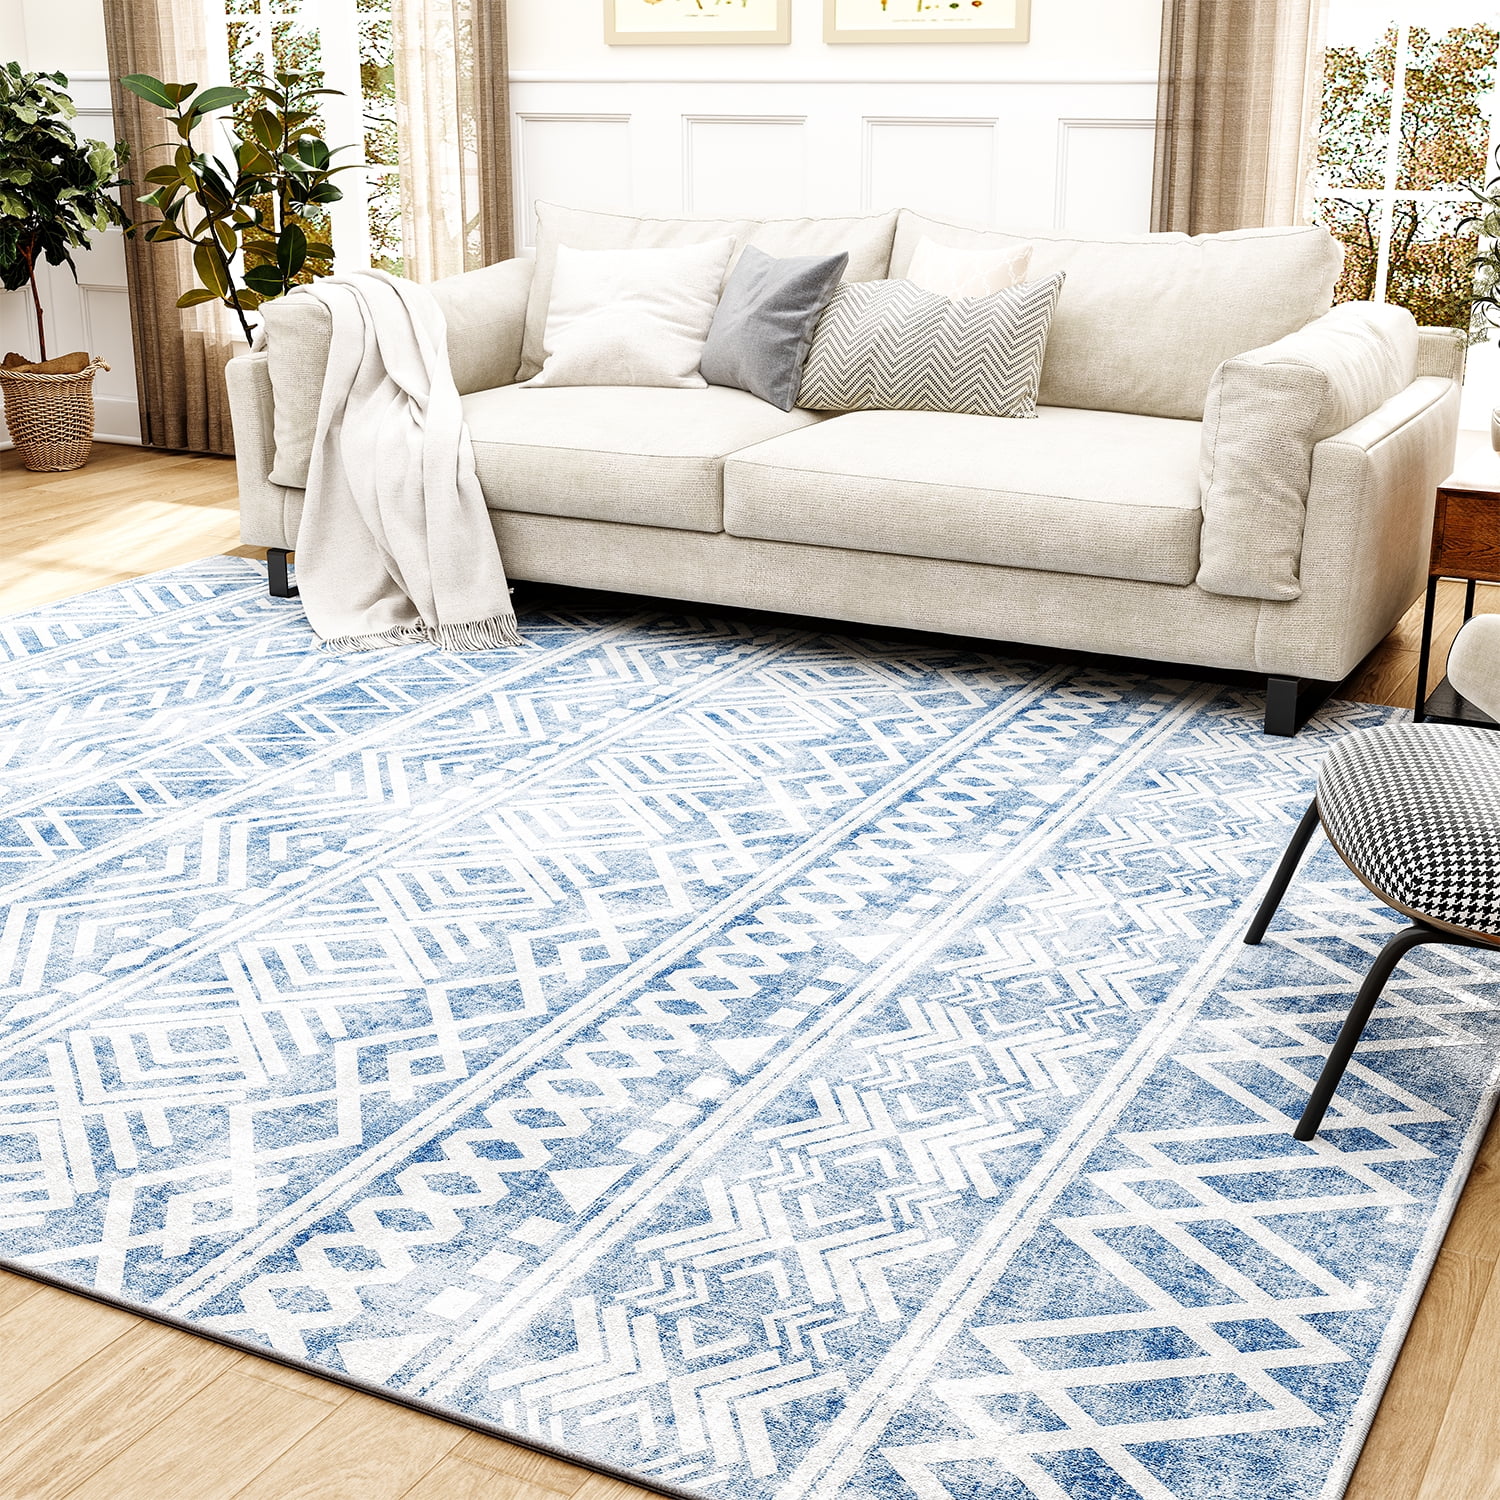 MontVoo 5'x7' Area Rugs for Living Room Washable Rugs Boho Large Area Rug Modern Geometric Neutral Carpet and Area Rugs for Home Decor Foldable Non